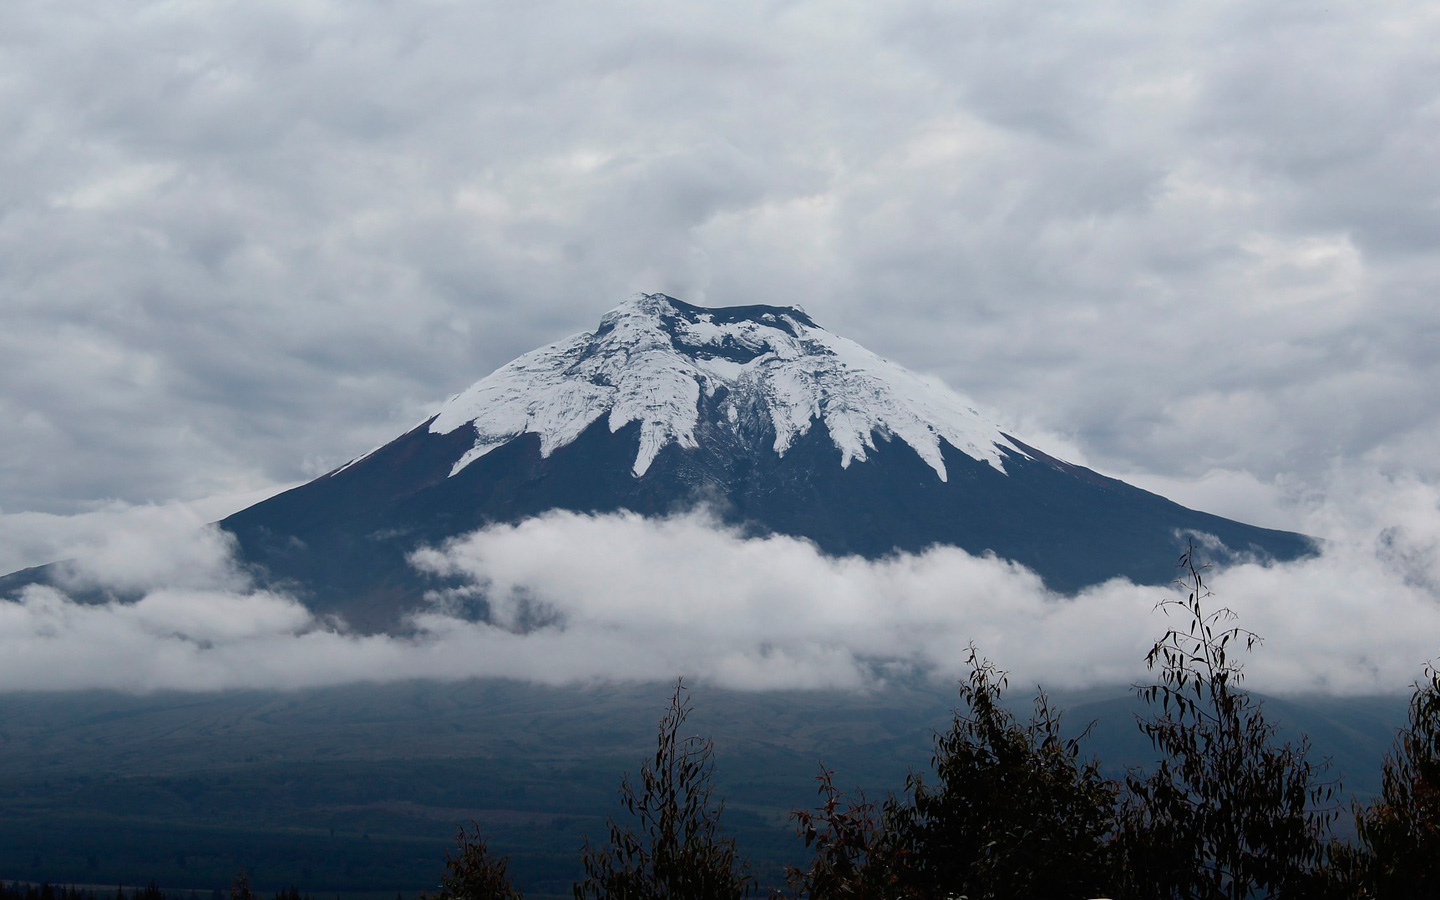 A majestic view of Cotopaxi